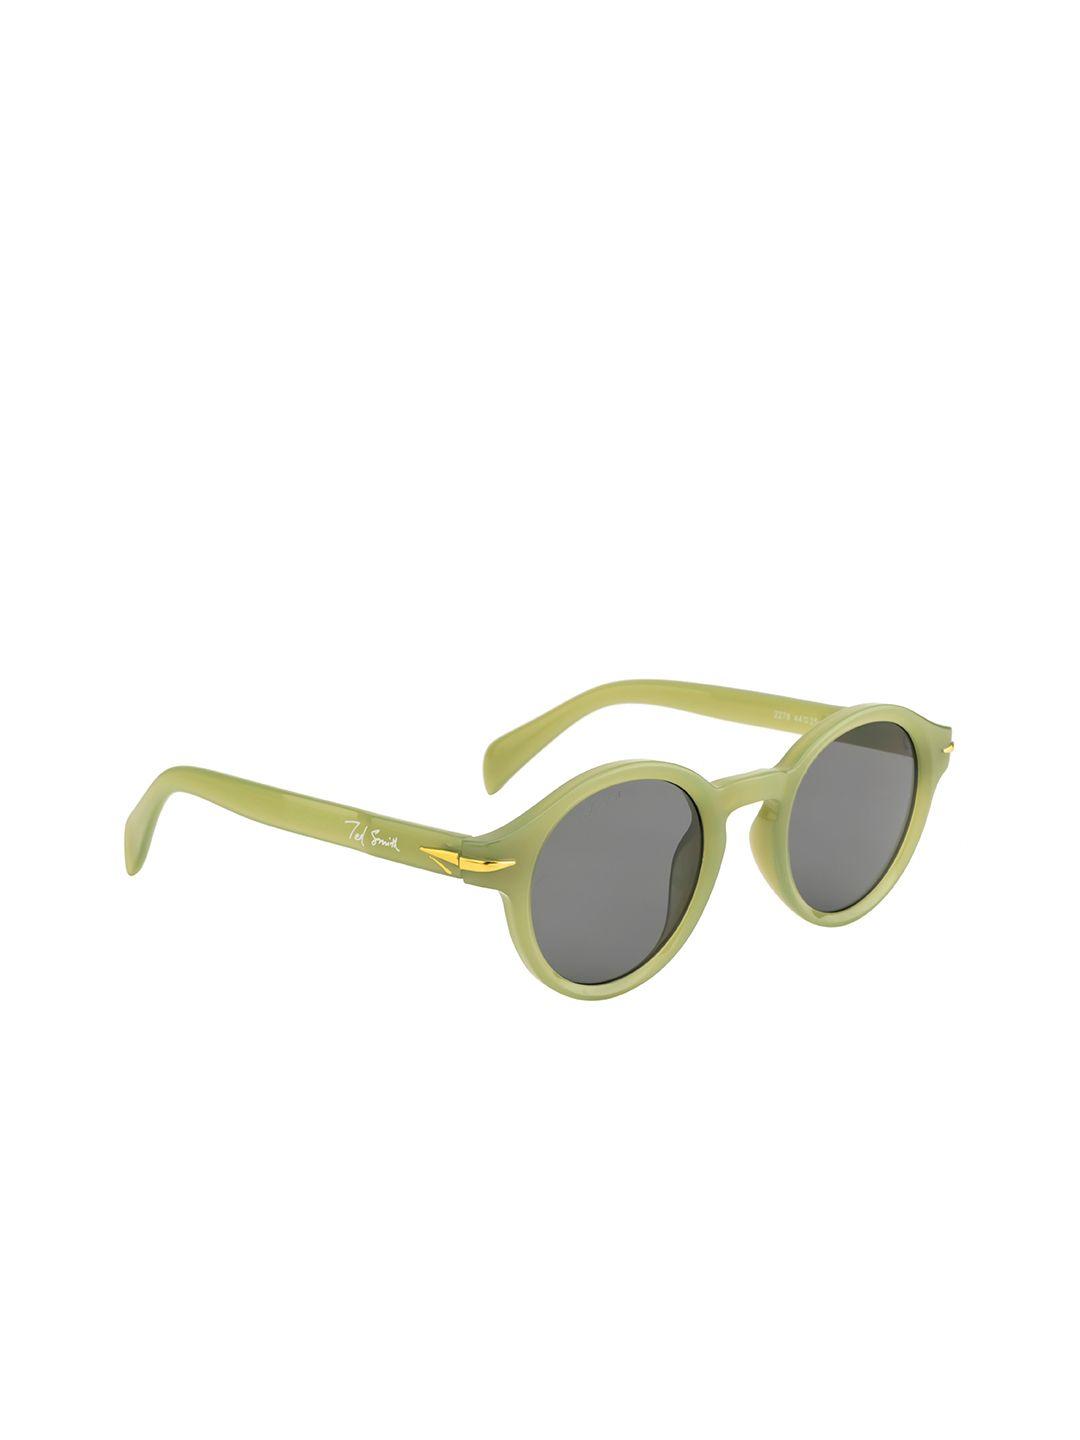 ted-smith-unisex-grey-lens-&-green-round-sunglasses-with-uv-protected-lens